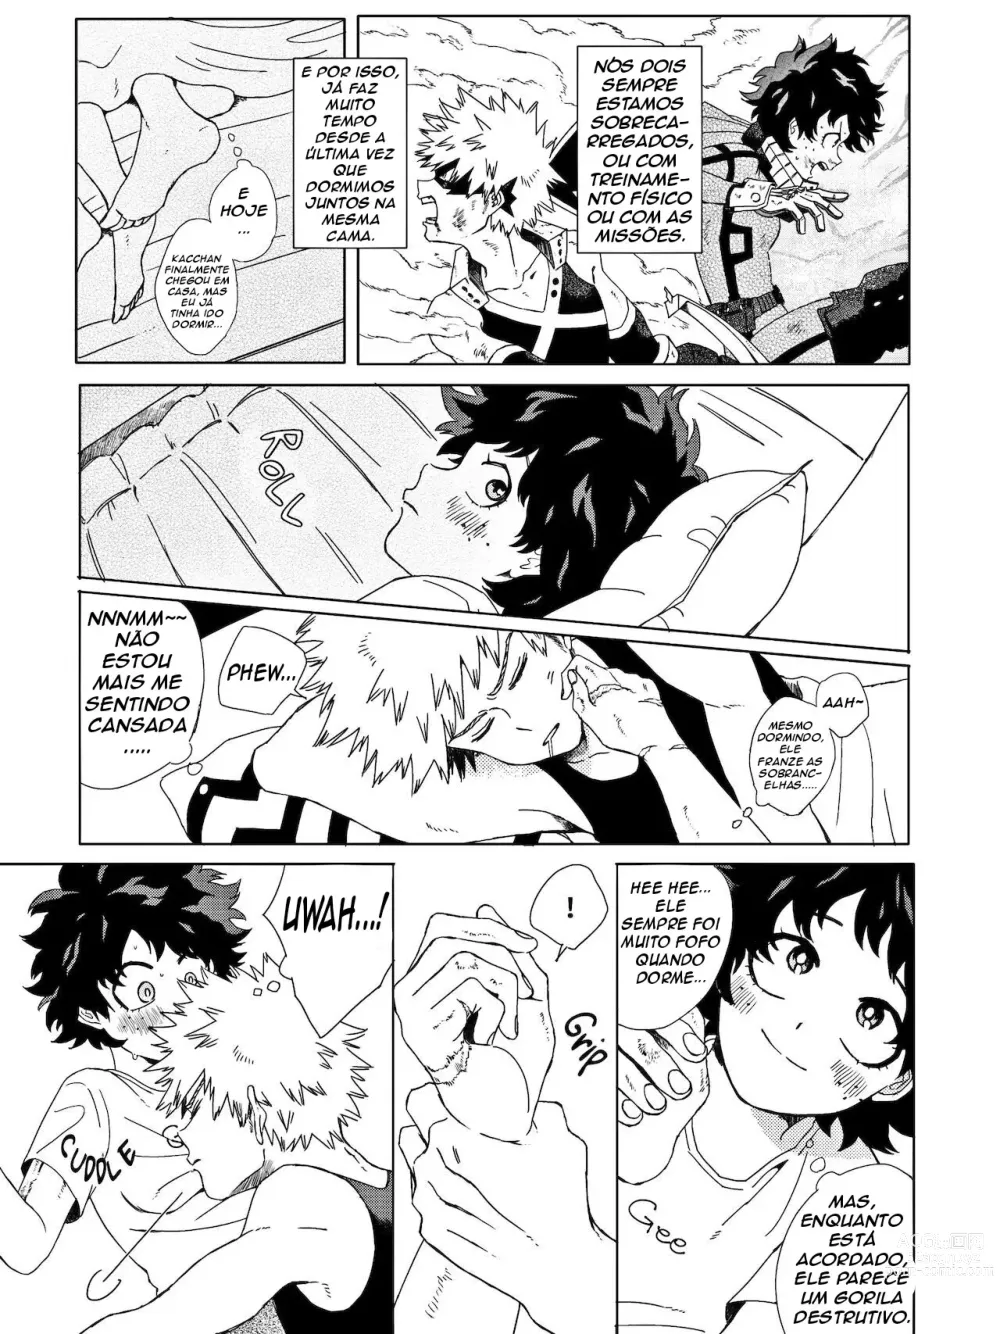 Page 5 of doujinshi The Thin Line Between Masturbation and Doing It [SpookyLatte] PT-BR